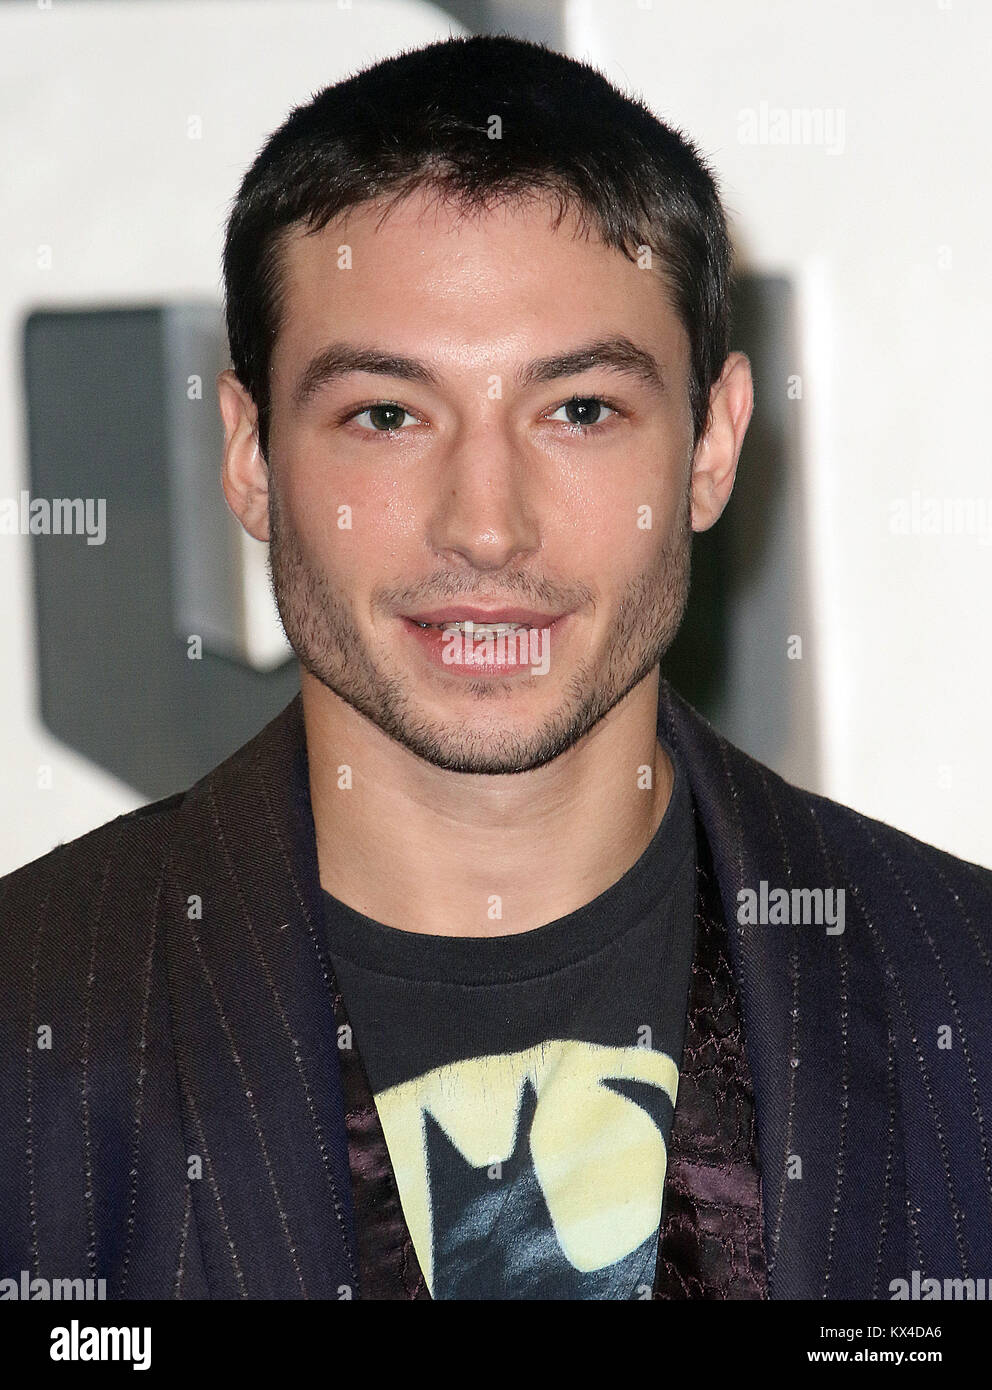 Nov 04, 2017 - Ezra Miller attending 'Justice League' Photocall, The College, Southampton Row in London, England, UK Stock Photo